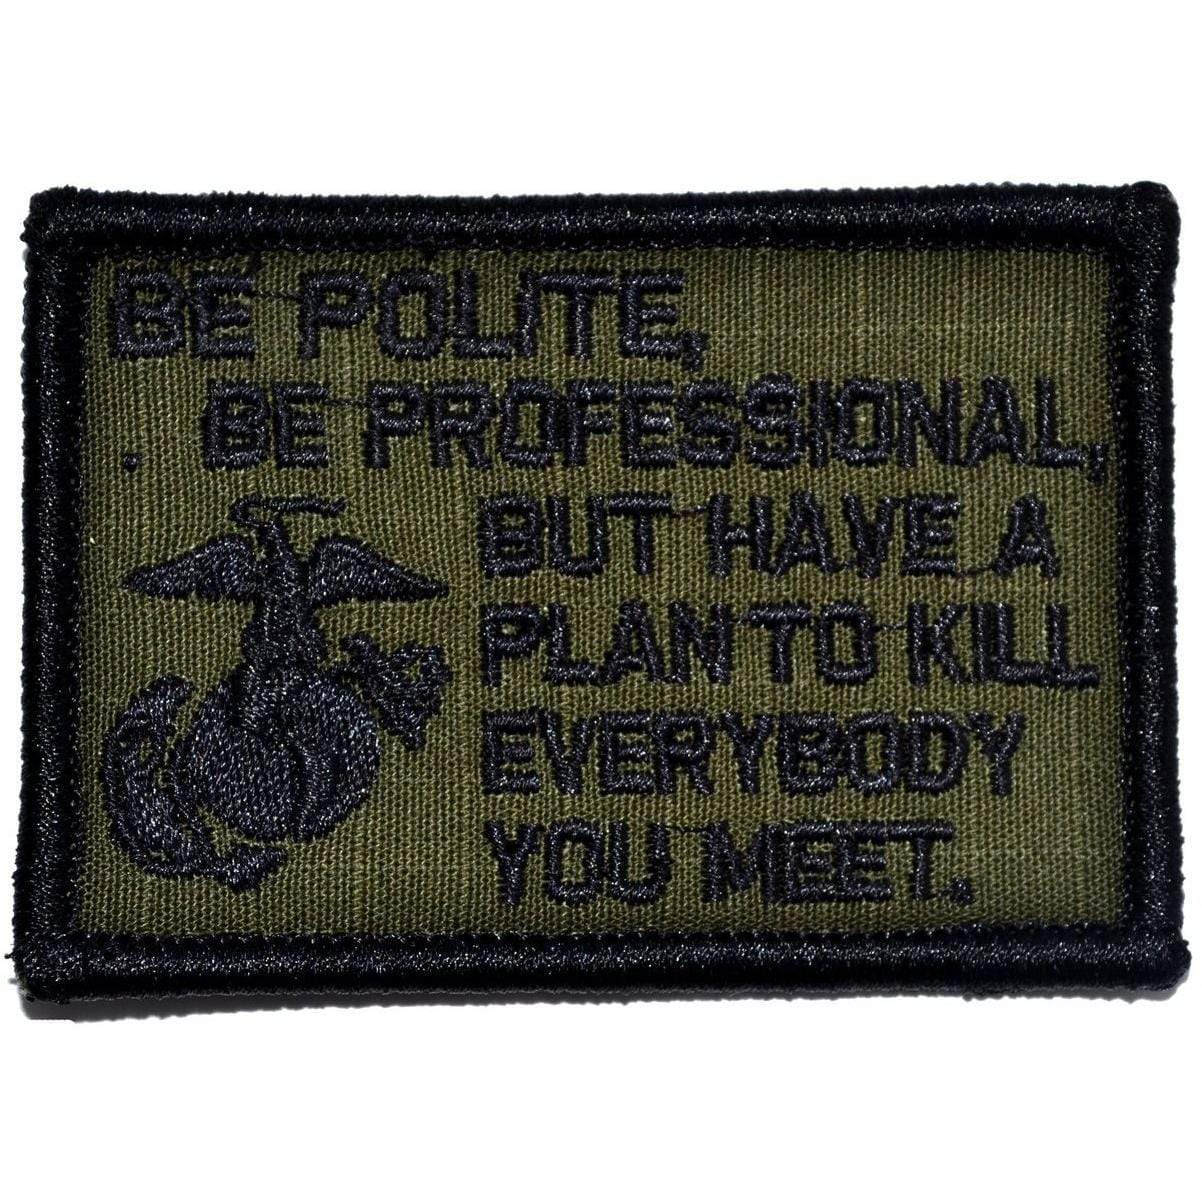 Tactical Gear Junkie Patches Olive Drab Be Polite, Be Professional USMC Mattis Quote - 2x3 Patch